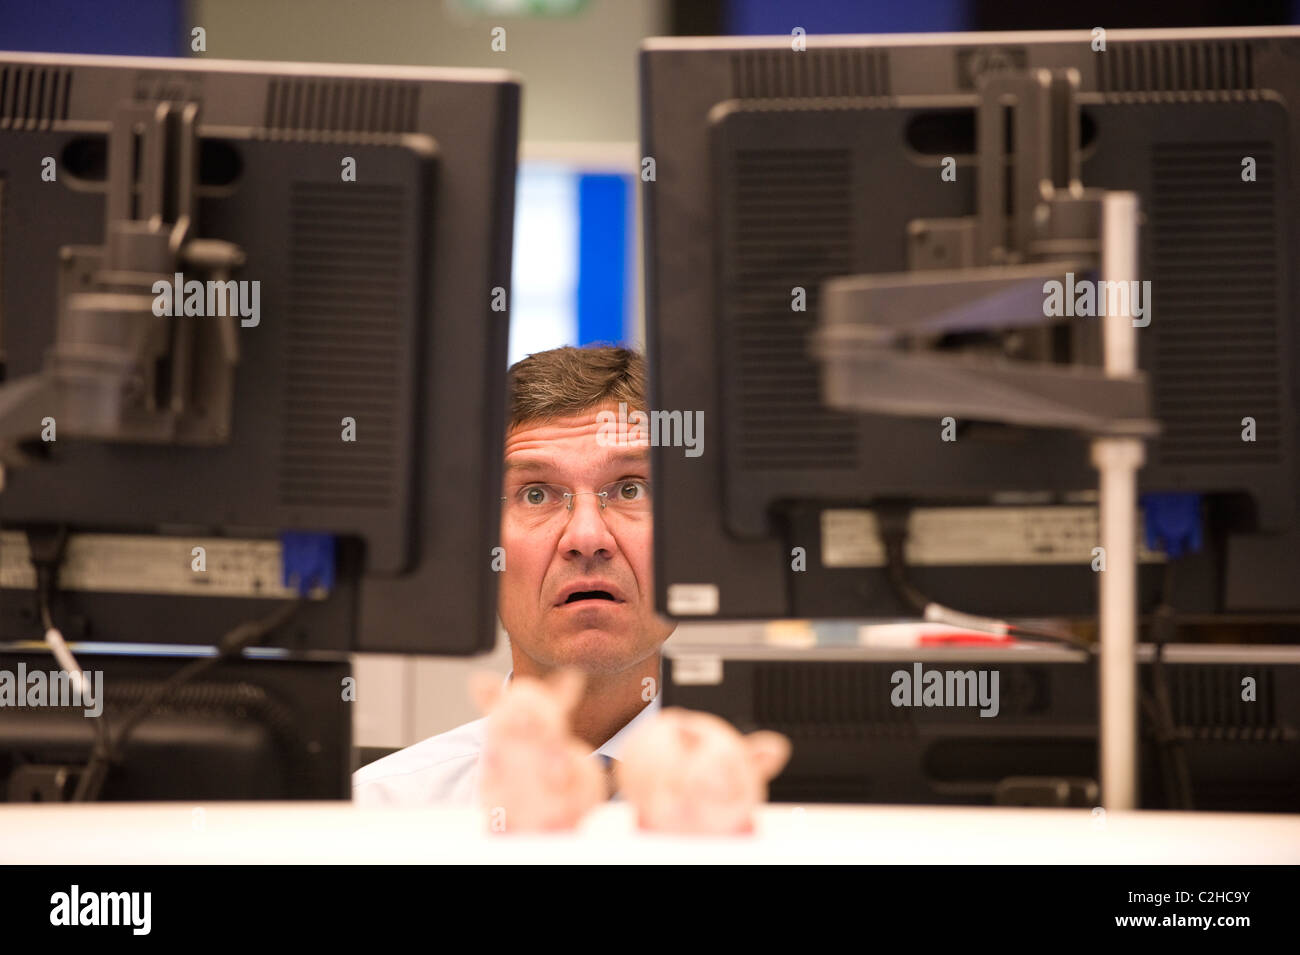 An equity trader at the screen of his computer, Frankfurt am Main, Germany Stock Photo